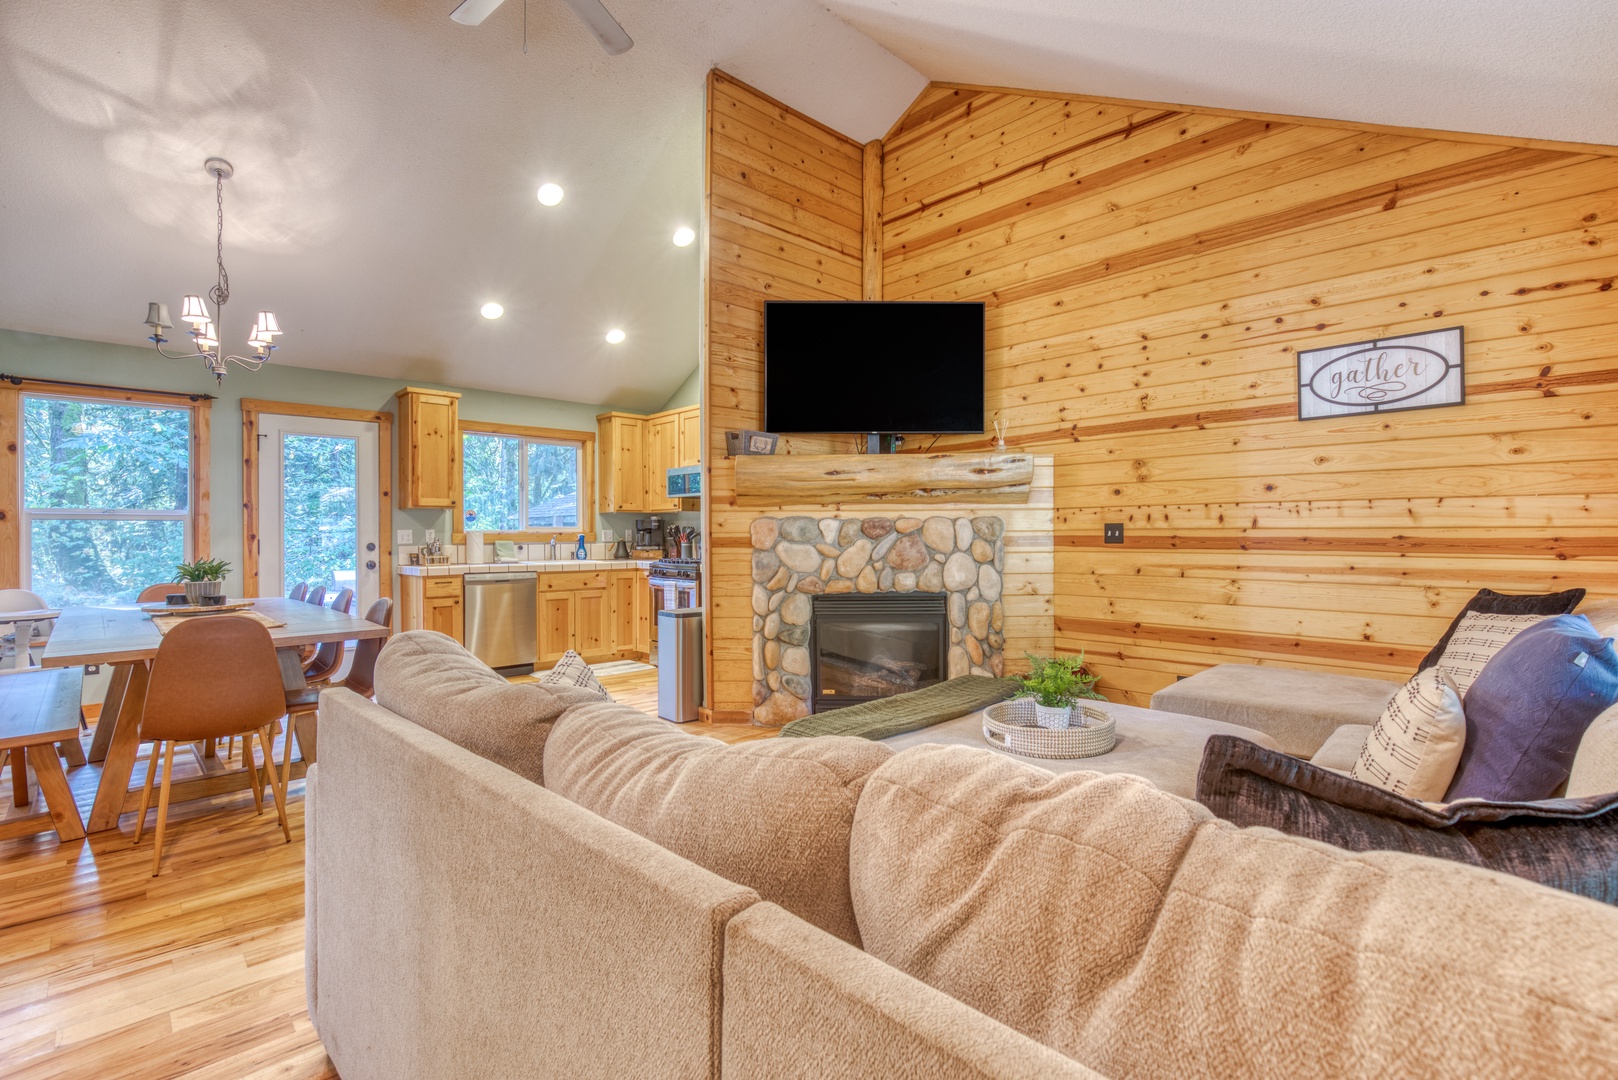 Brightwood Vacation Rentals, Riverside Retreat - Get cozy on the couch next to the fire and have a movie night with your group